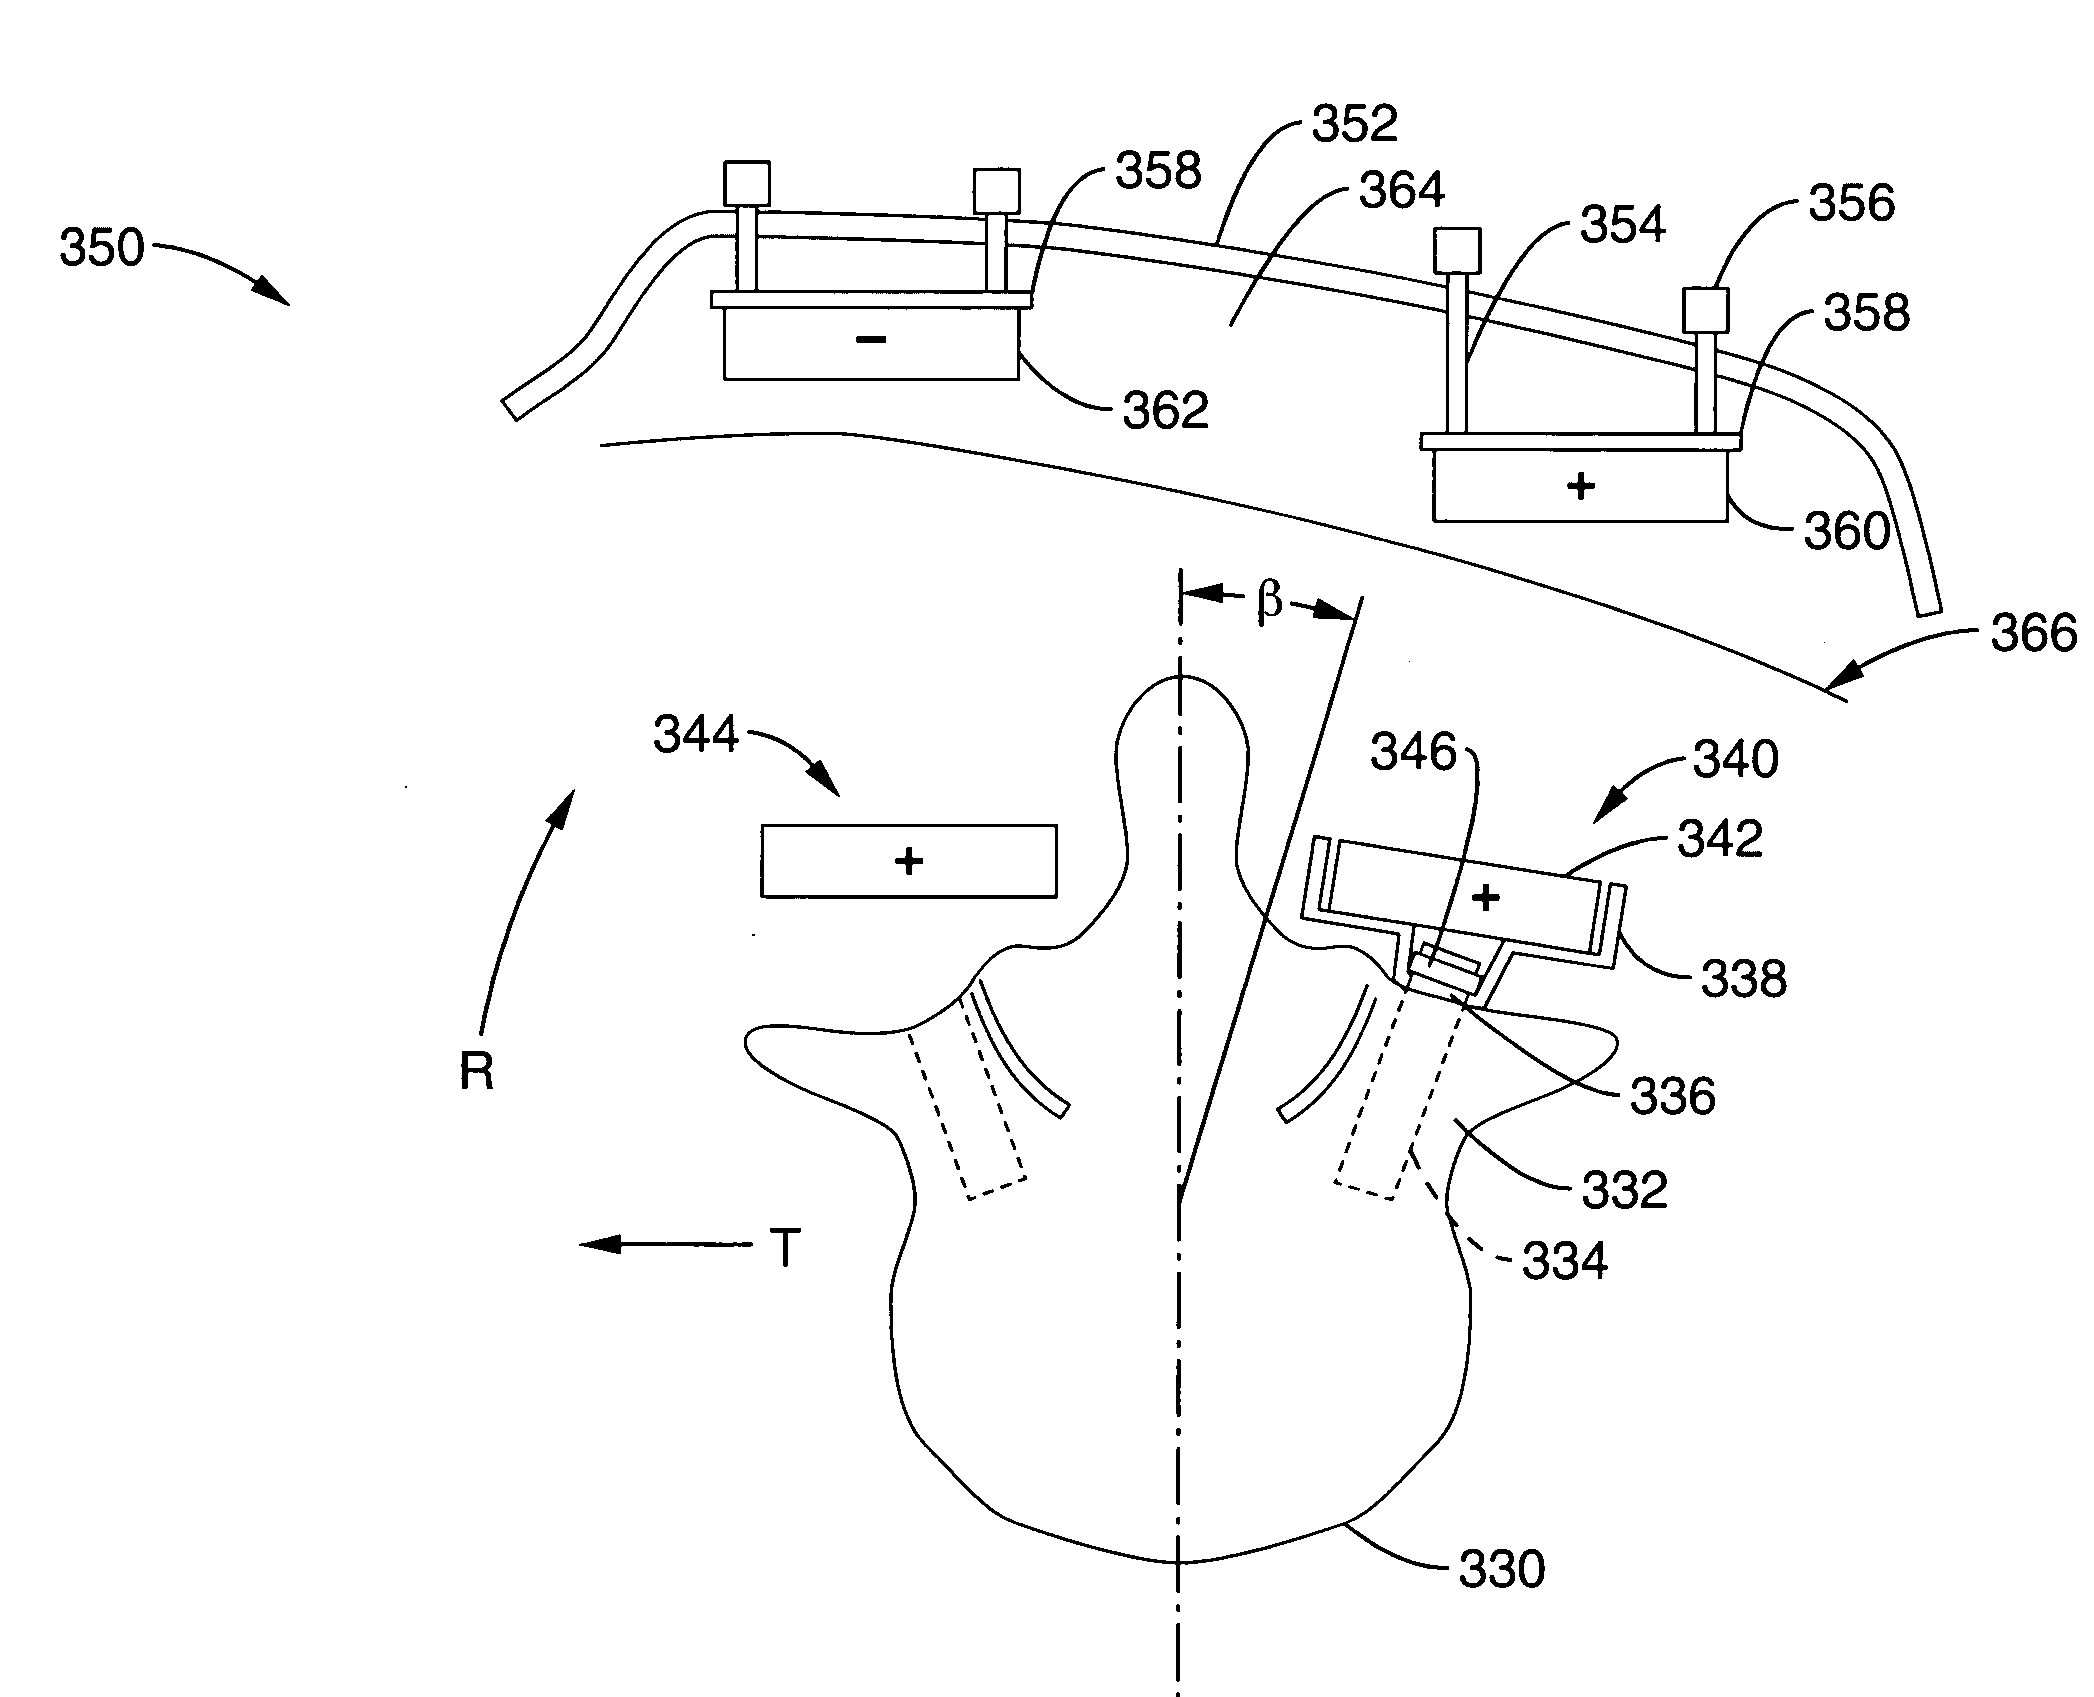 Apparatus and methods for magnetic alteration of anatomical features